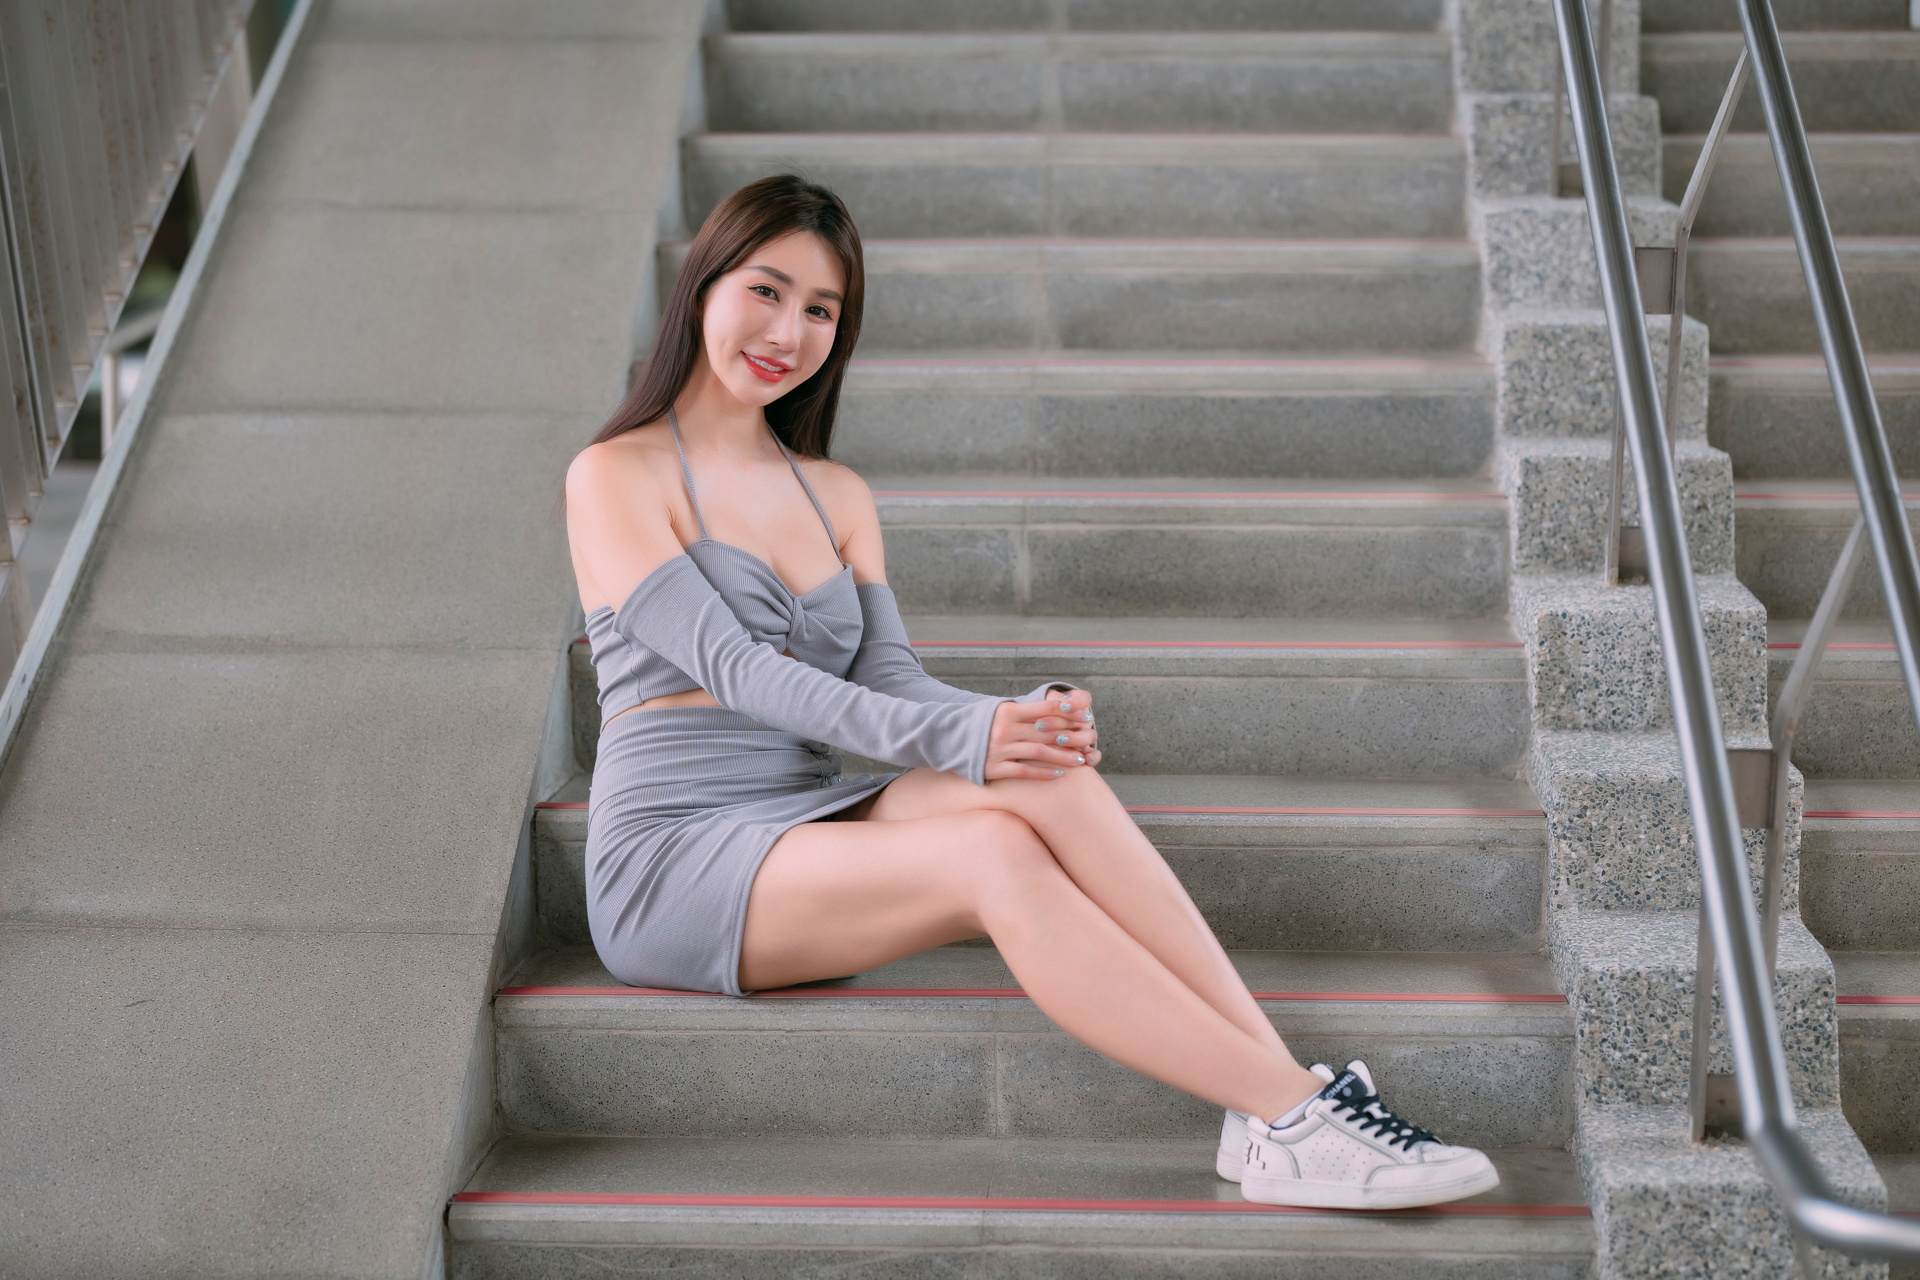 People 1920x1280 Asian model women long hair dark hair sitting stairs sneakers grey skirt grey tops iron railing hands on knees white sneakers legs socks miniskirt skirt bare shoulders cleavage red lipstick smiling looking at viewer pale women outdoors outdoors